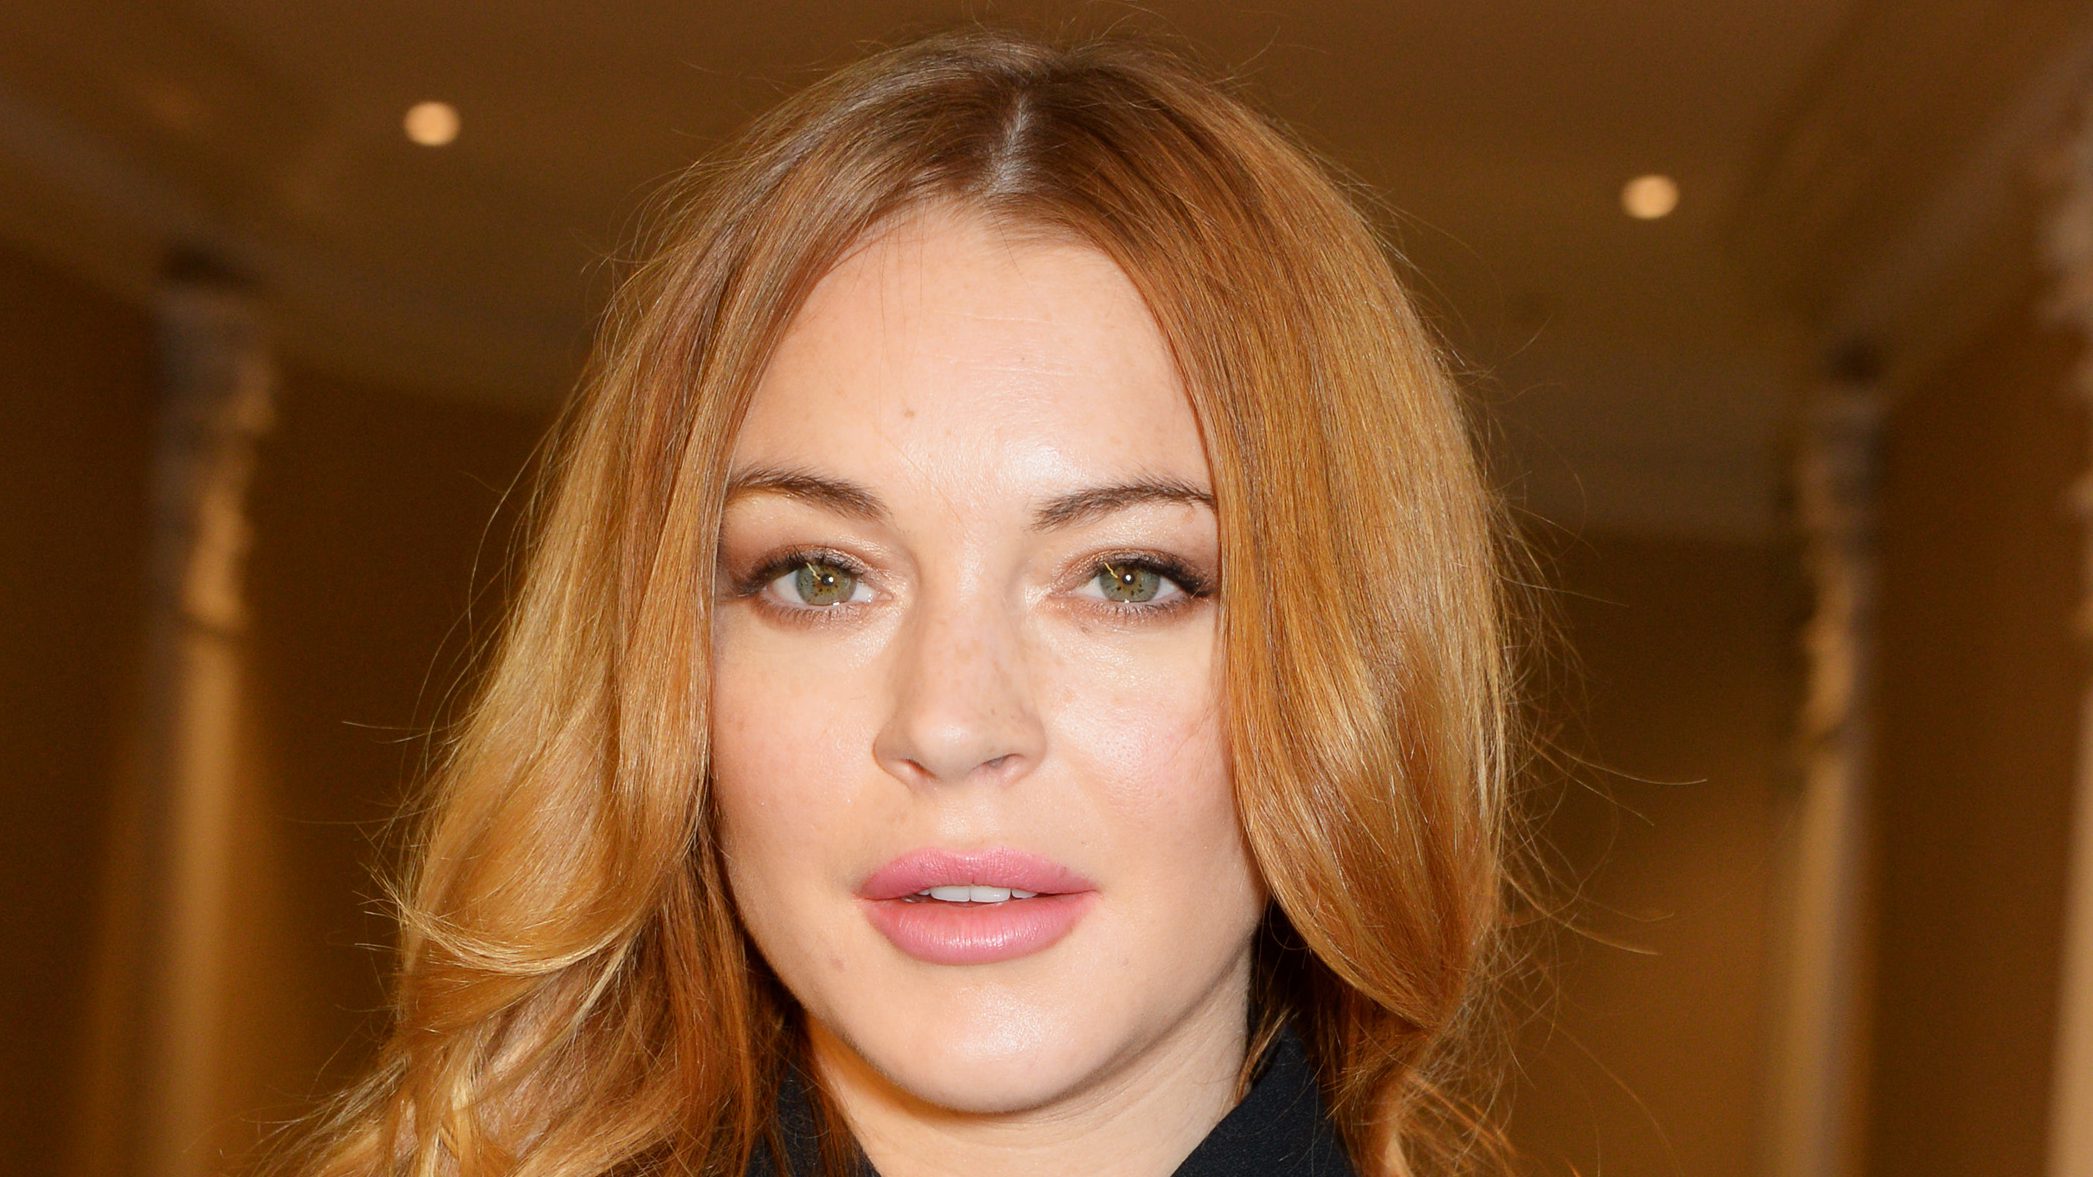 lindsay-lohan-throws-support-behind-power-of-social-media-following-struggles-with-paparazzi